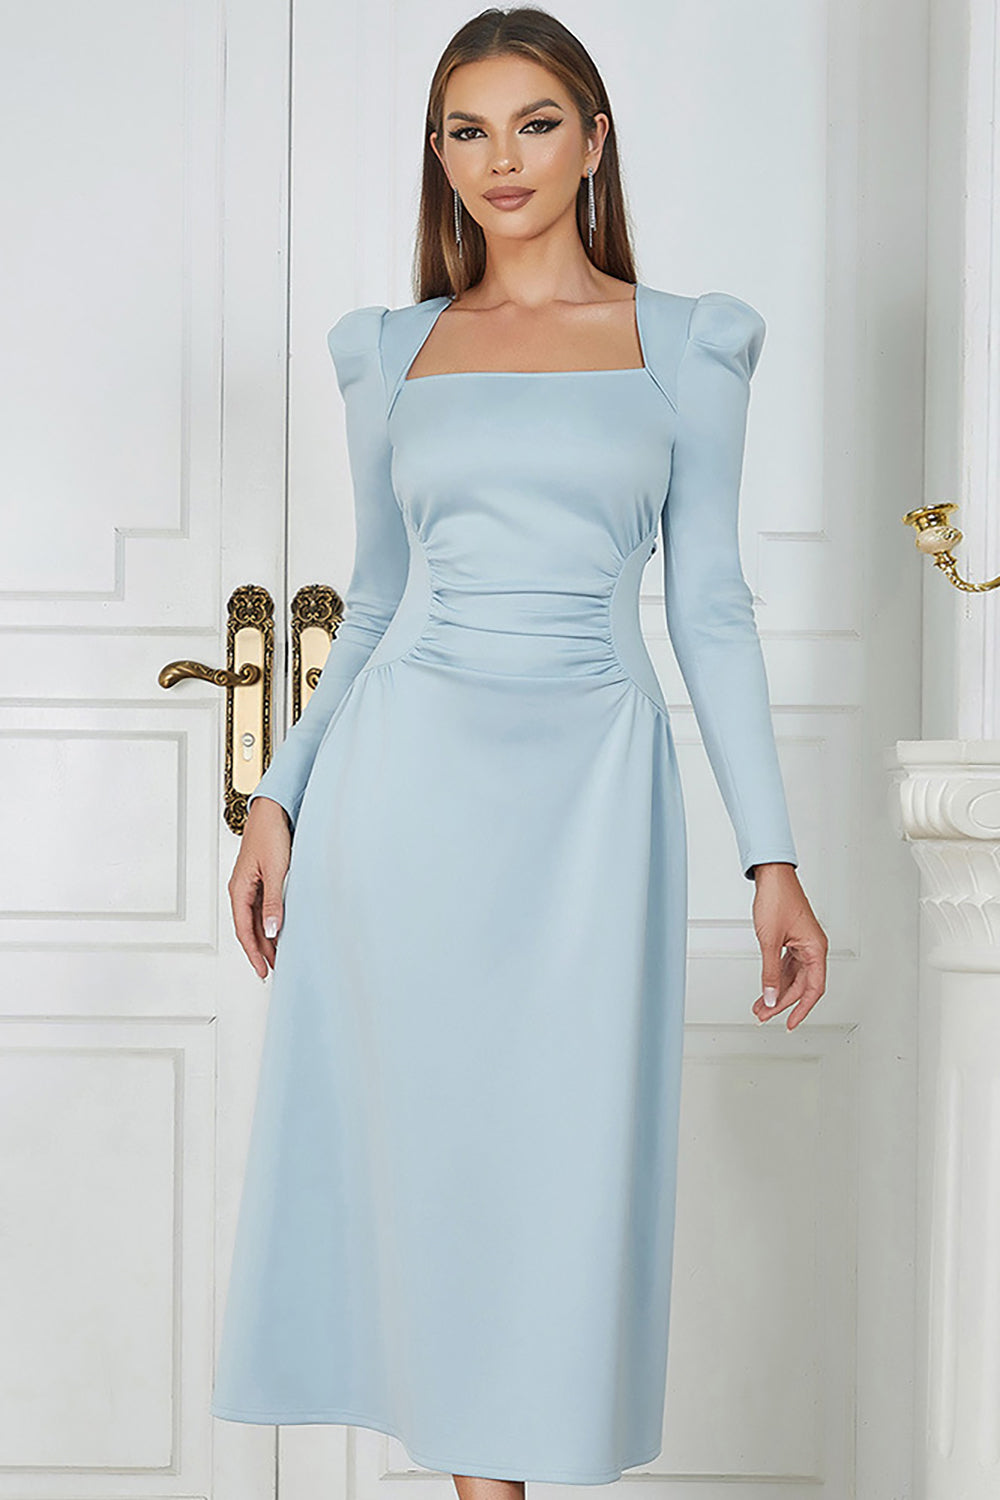 Long Sleeves Sky Blue Formal Dress with Ruffles